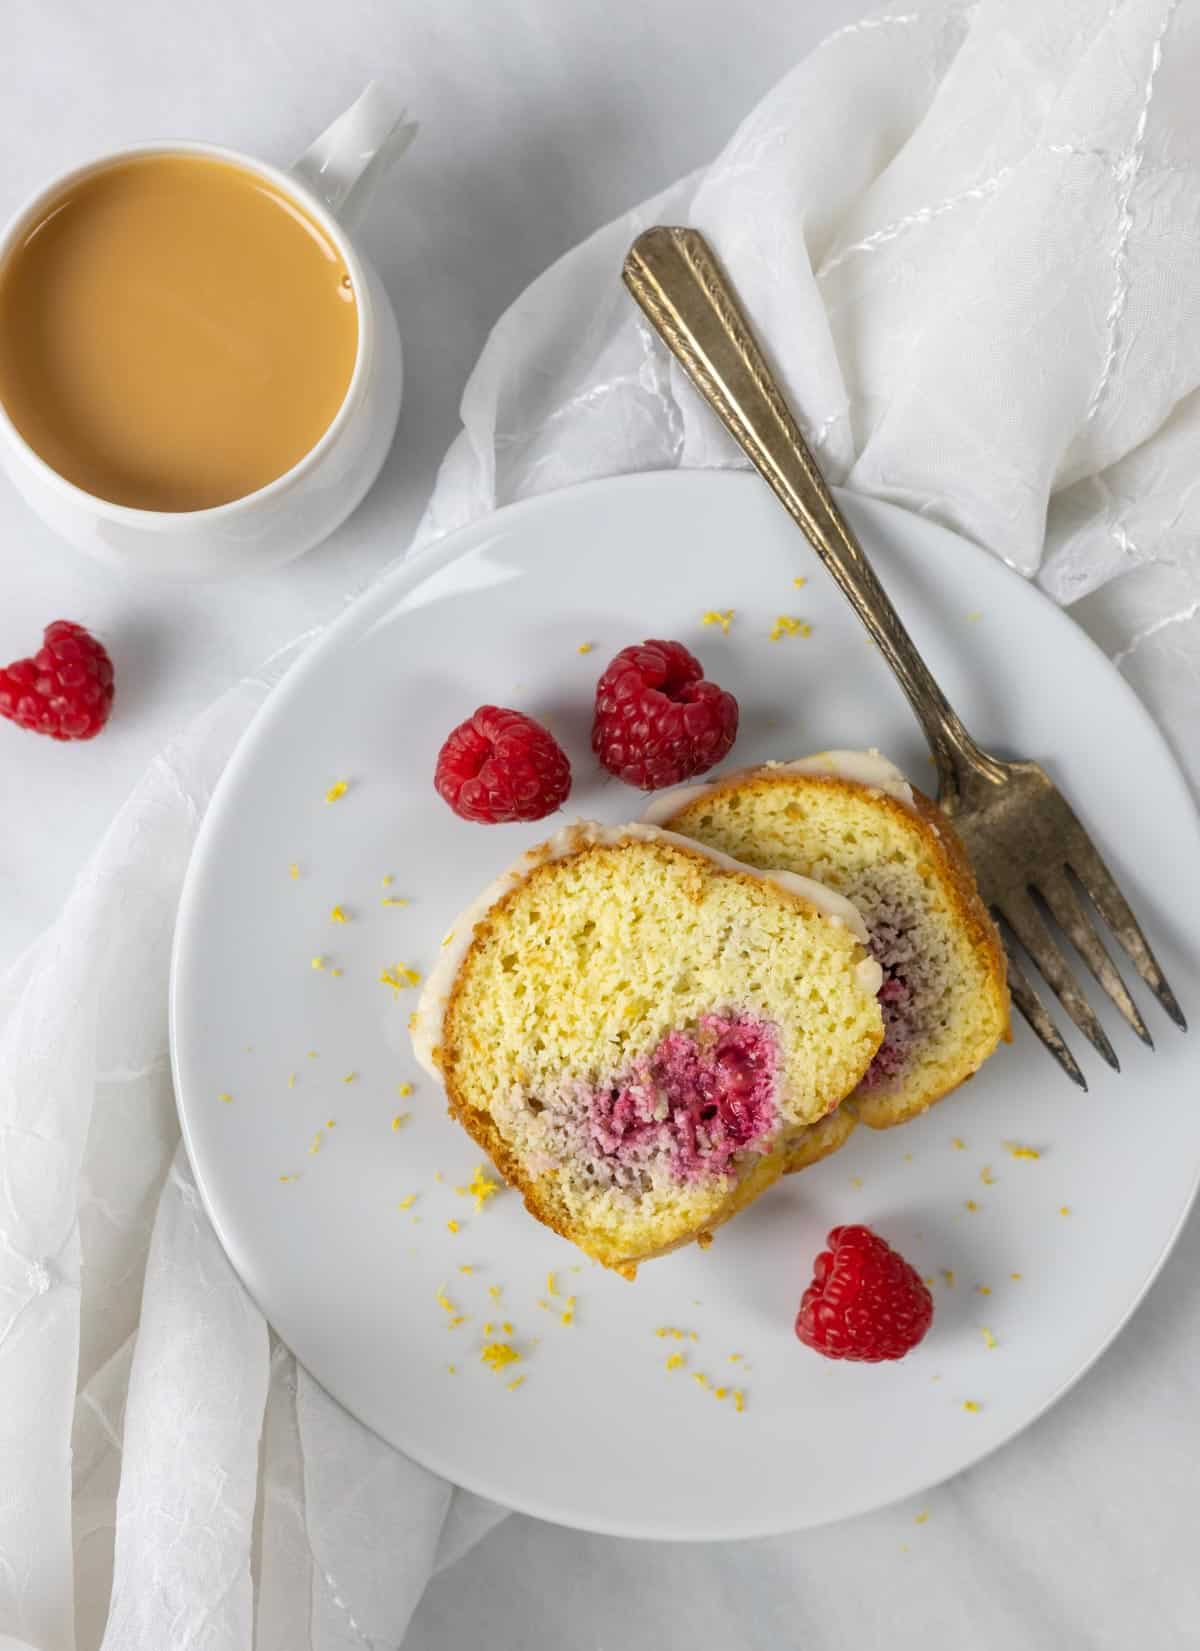 White plate with two slices of glazed keto bundt cake, a fork, and raspberries with lemon zest around the slices.